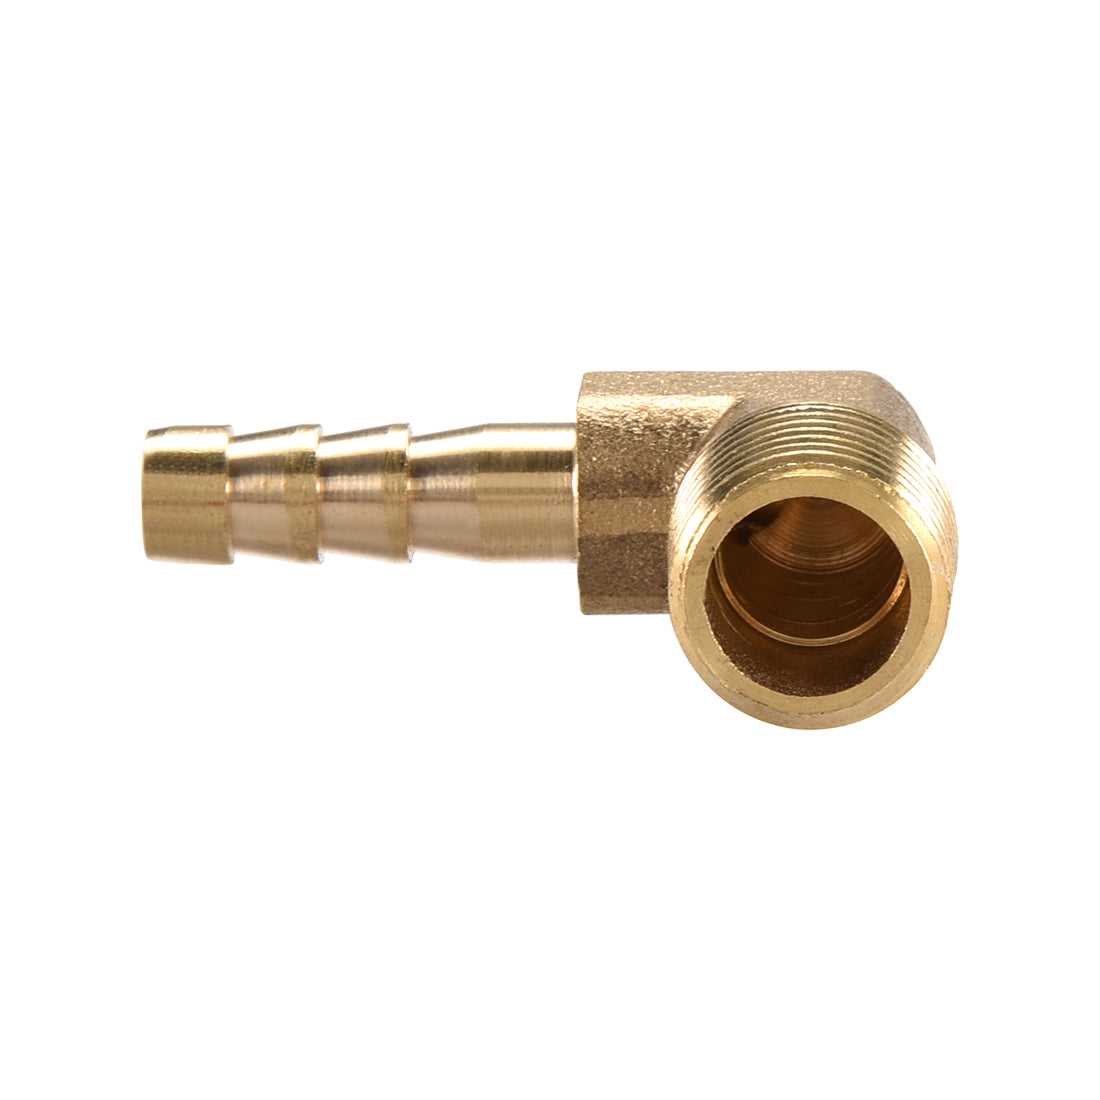 Uxcell Uxcell Brass Barb Hose Fitting 90 Degree Elbow 6mm Barbed x 1/4 PT Male Pipe